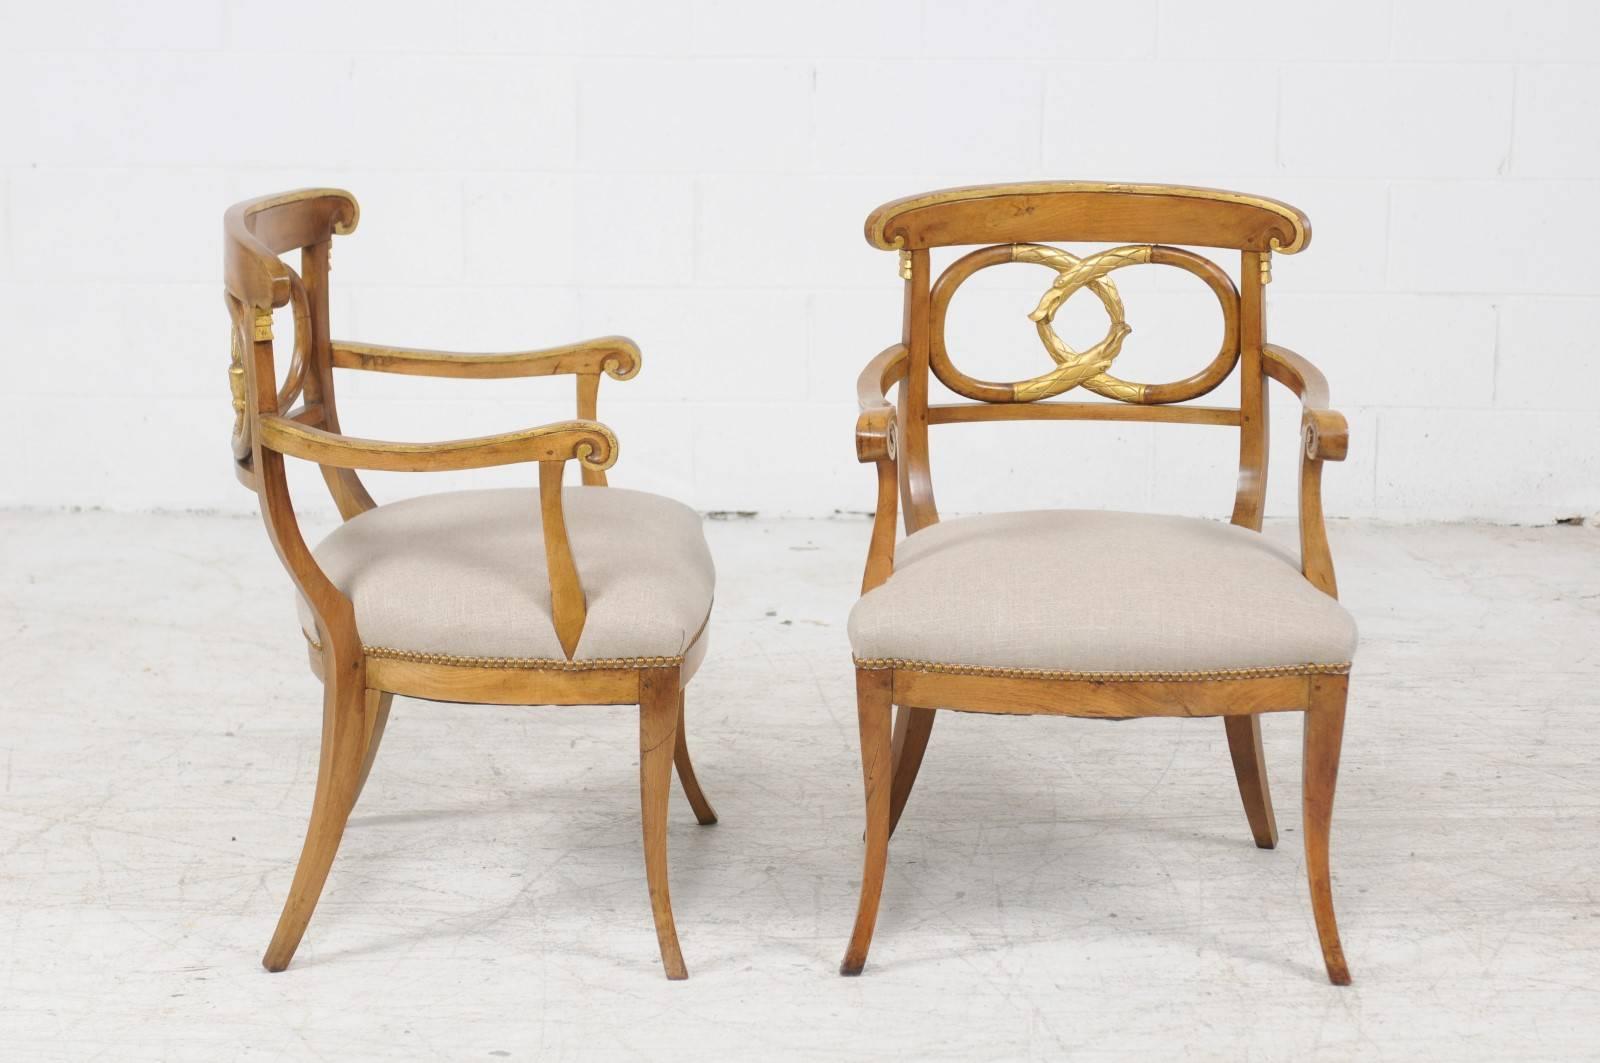 Pair of Italian 1860s Parcel-Gilt Walnut Upholstered Chairs with Serpent Motifs 4